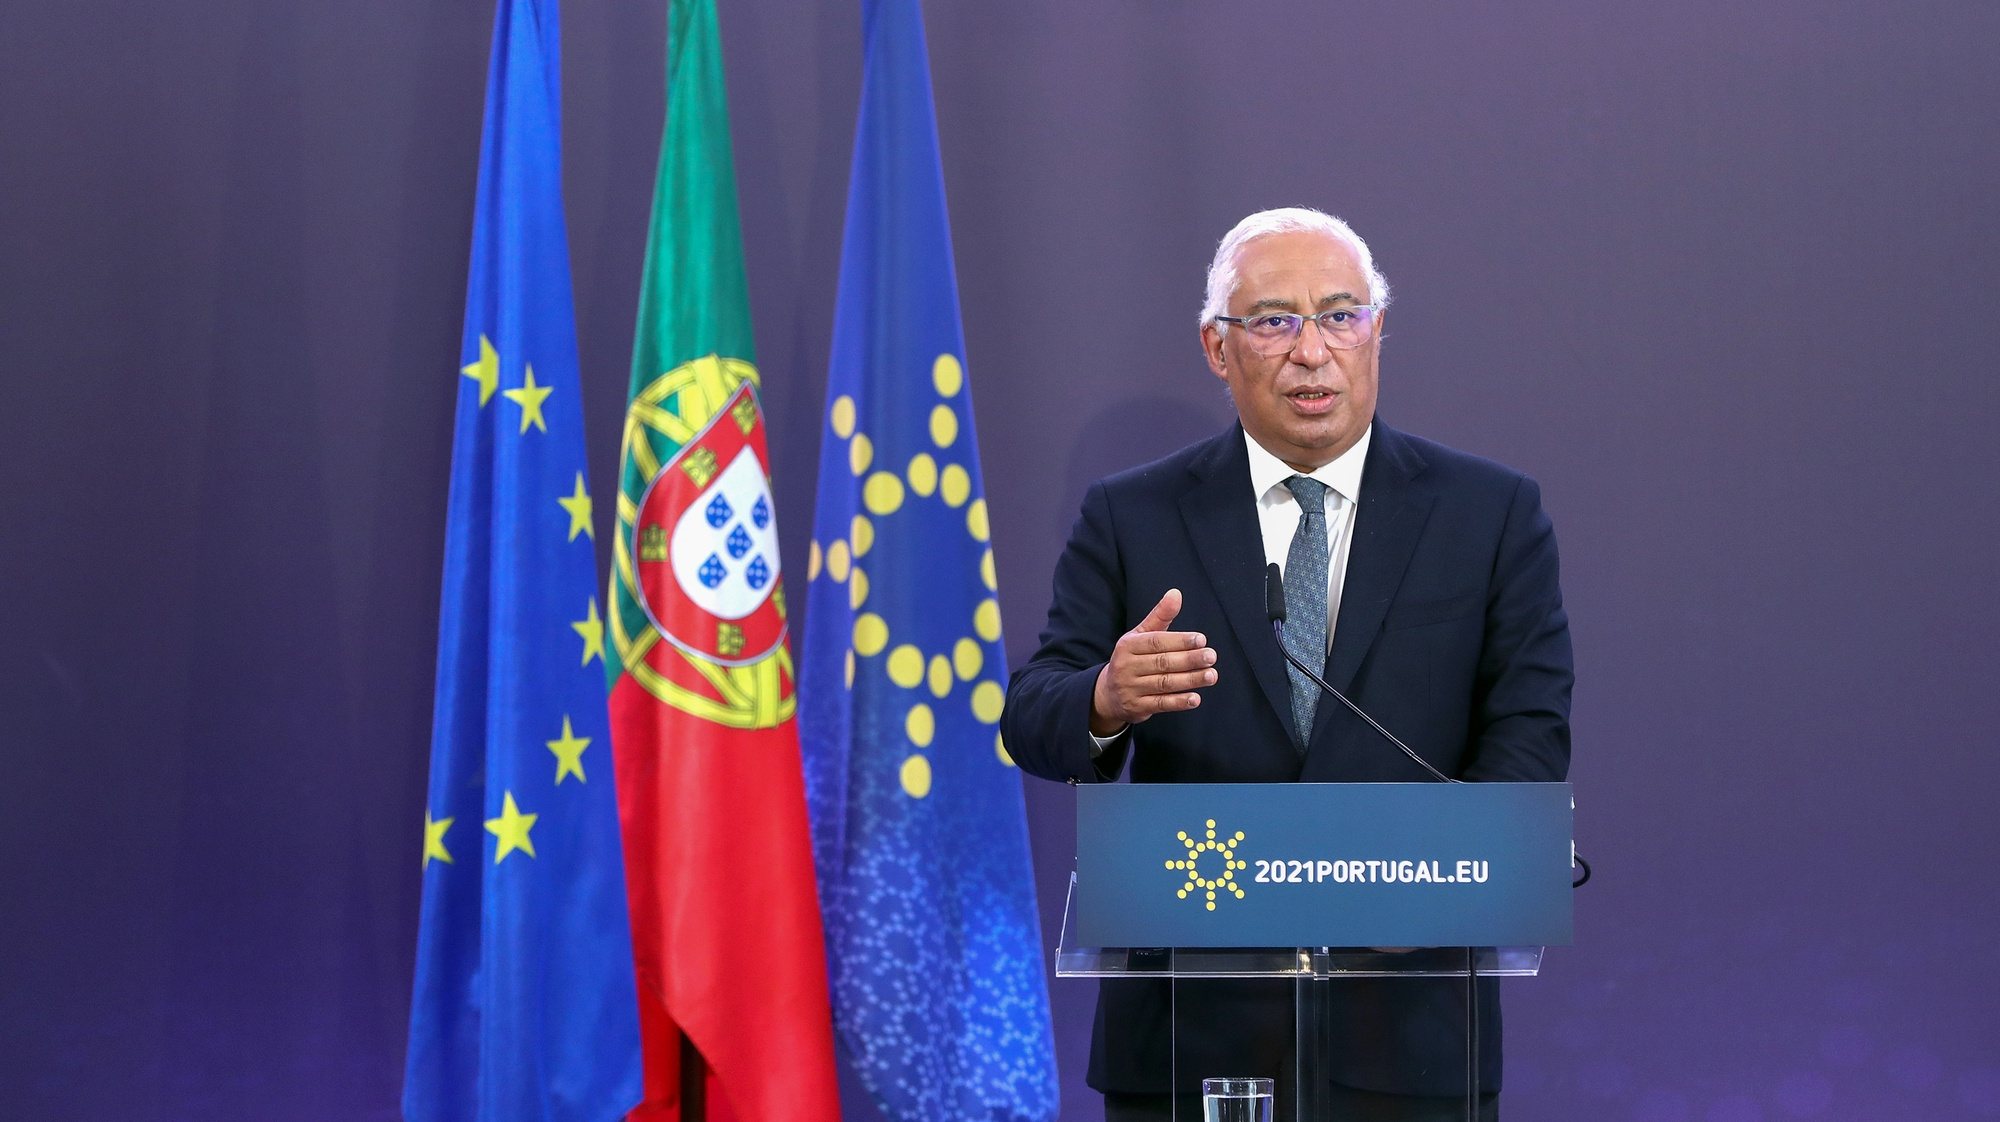 Portuguese Prime Minister Antonio Costa attends to a press conference after a two days video conference of the members of the European Council to discuss the current situation of the COVID-19 pandemic, preparedness for health threats, security and defence, and relations with the Southern Neighbourhood, in Lisbon, Portugal, 26 February 2021.  ANTONIO PEDRO SANTOS/LUSA